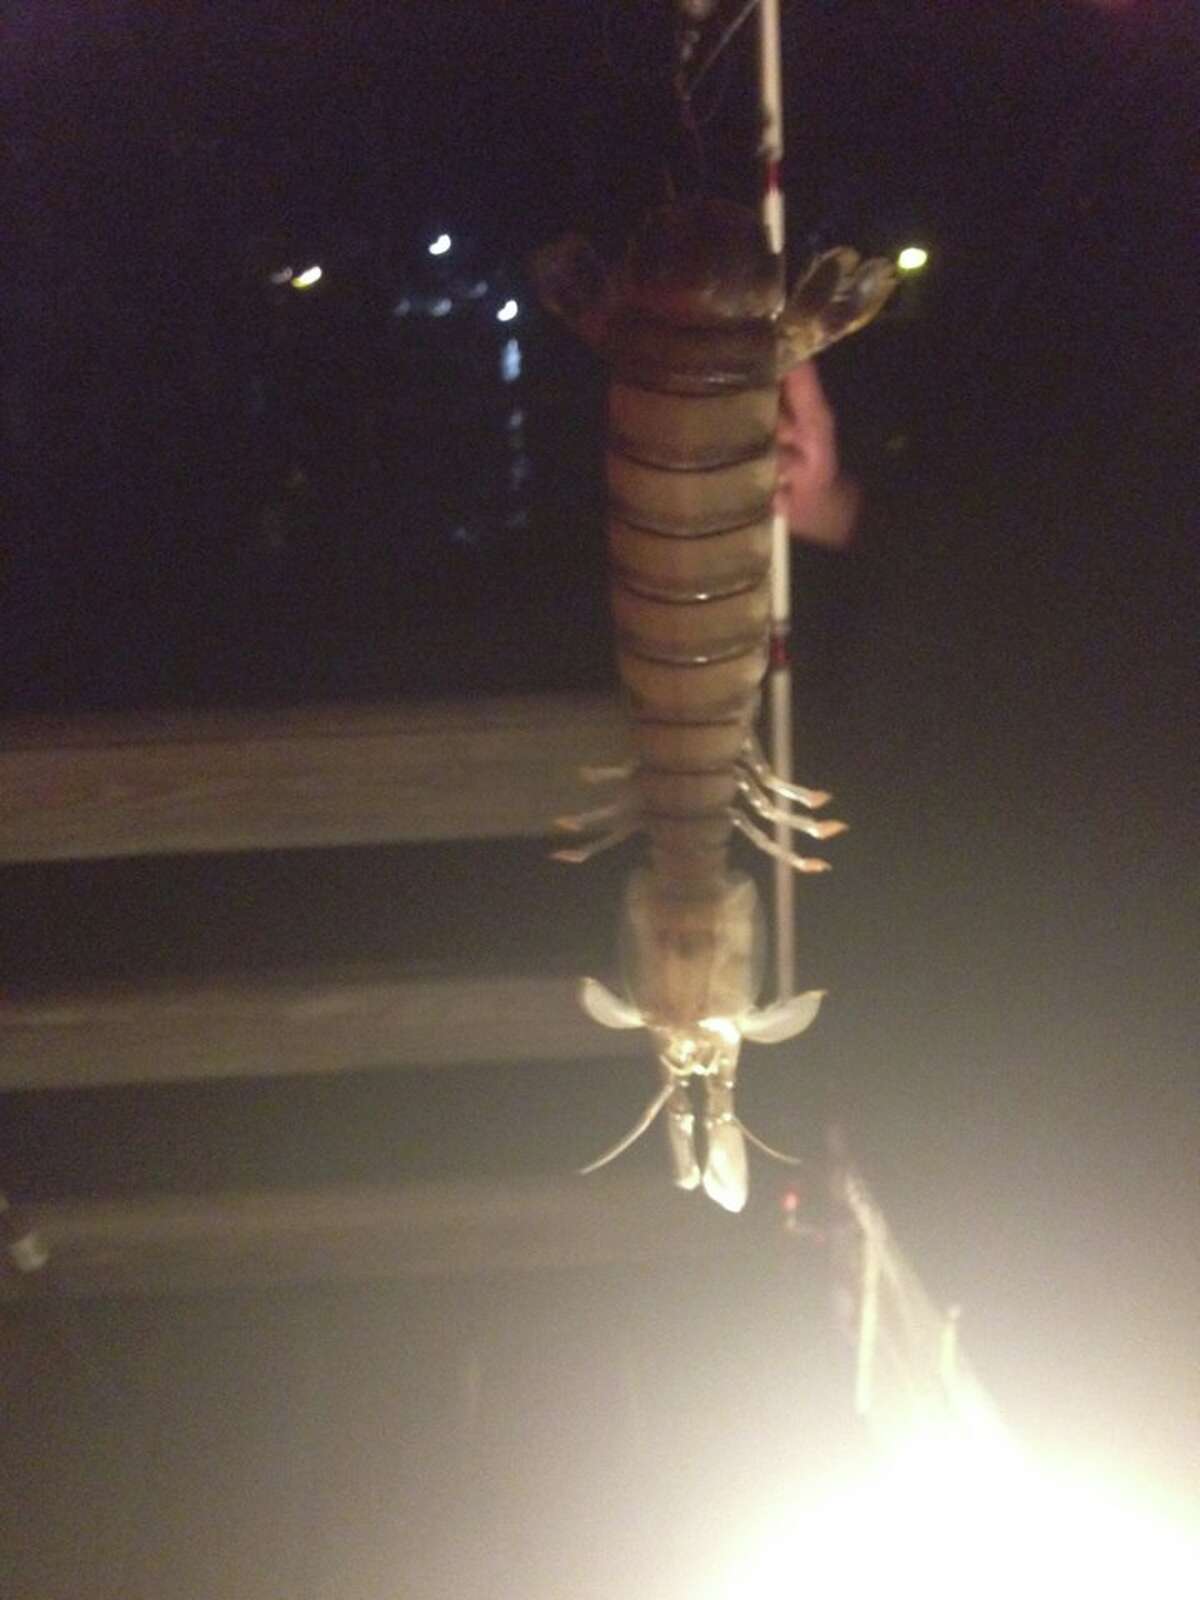 The 18 inch shrimp is thought to be a mantis shrimp actually a type of cruscean with a powerful tail and predatory claw.